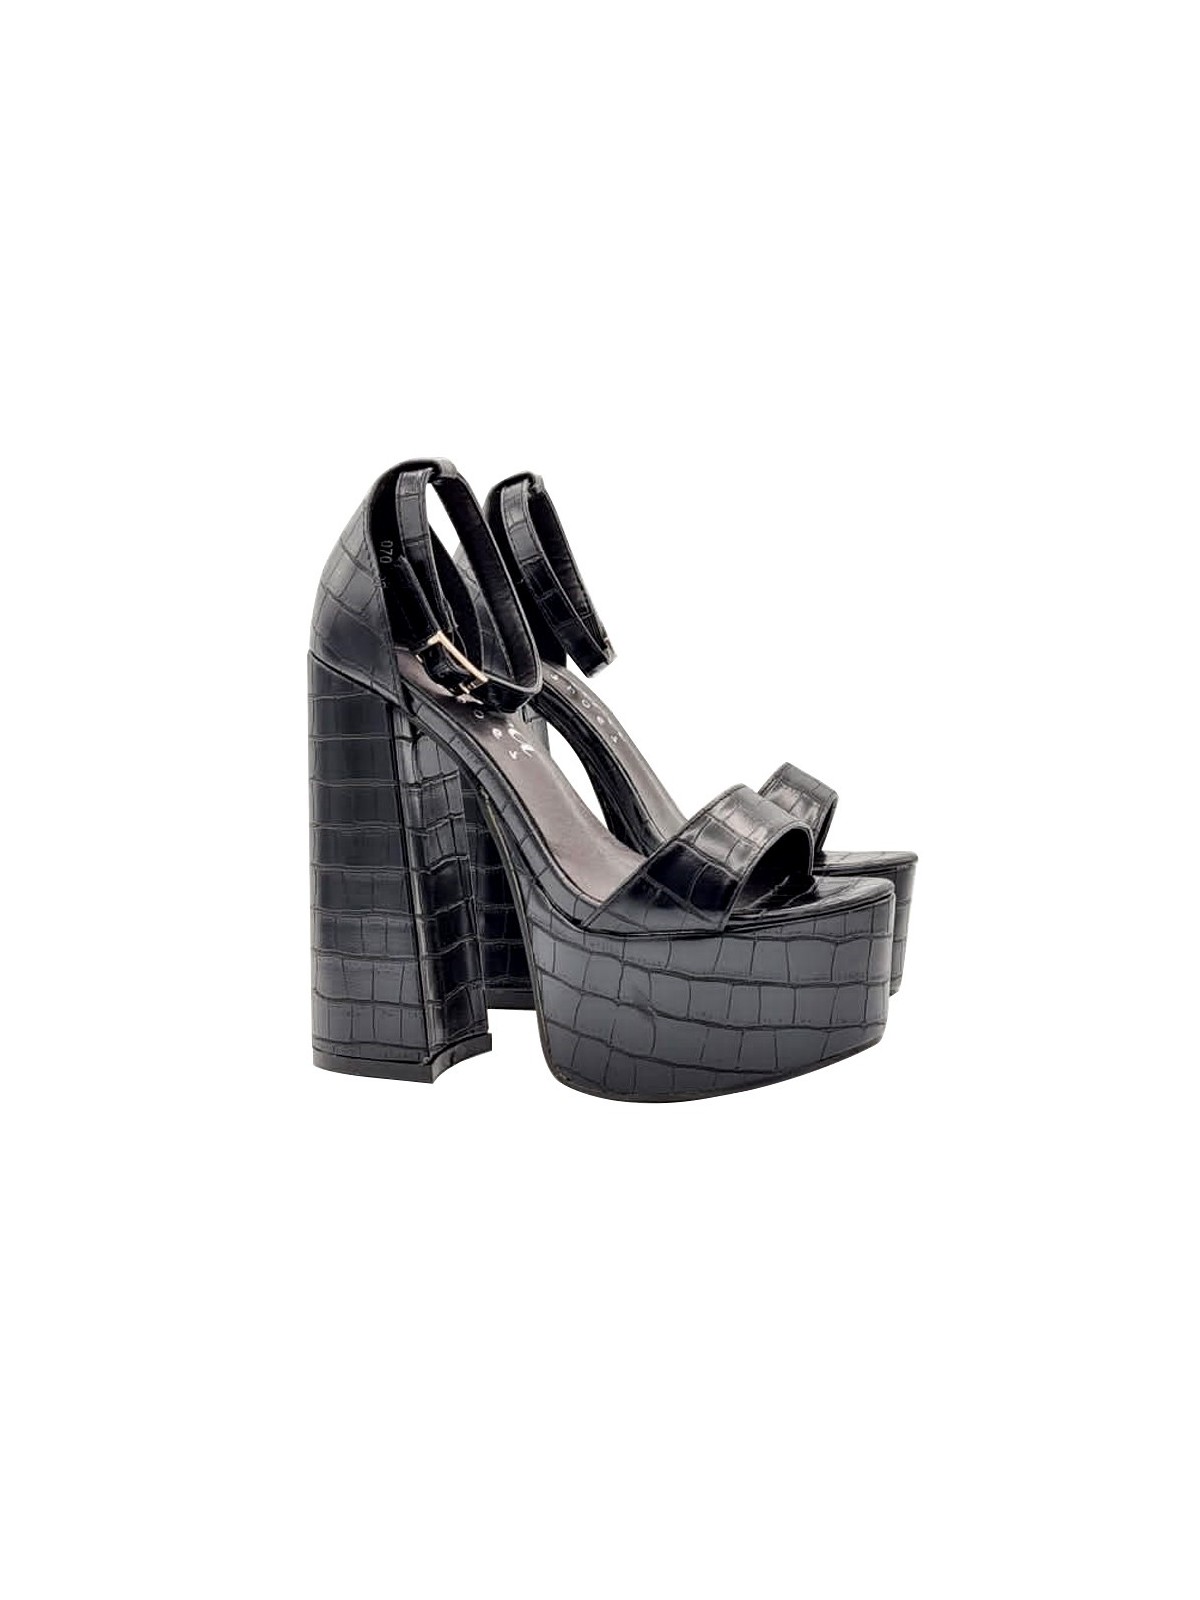 BLACK SANDALS WITH STRAP AND 14 CM HEEL